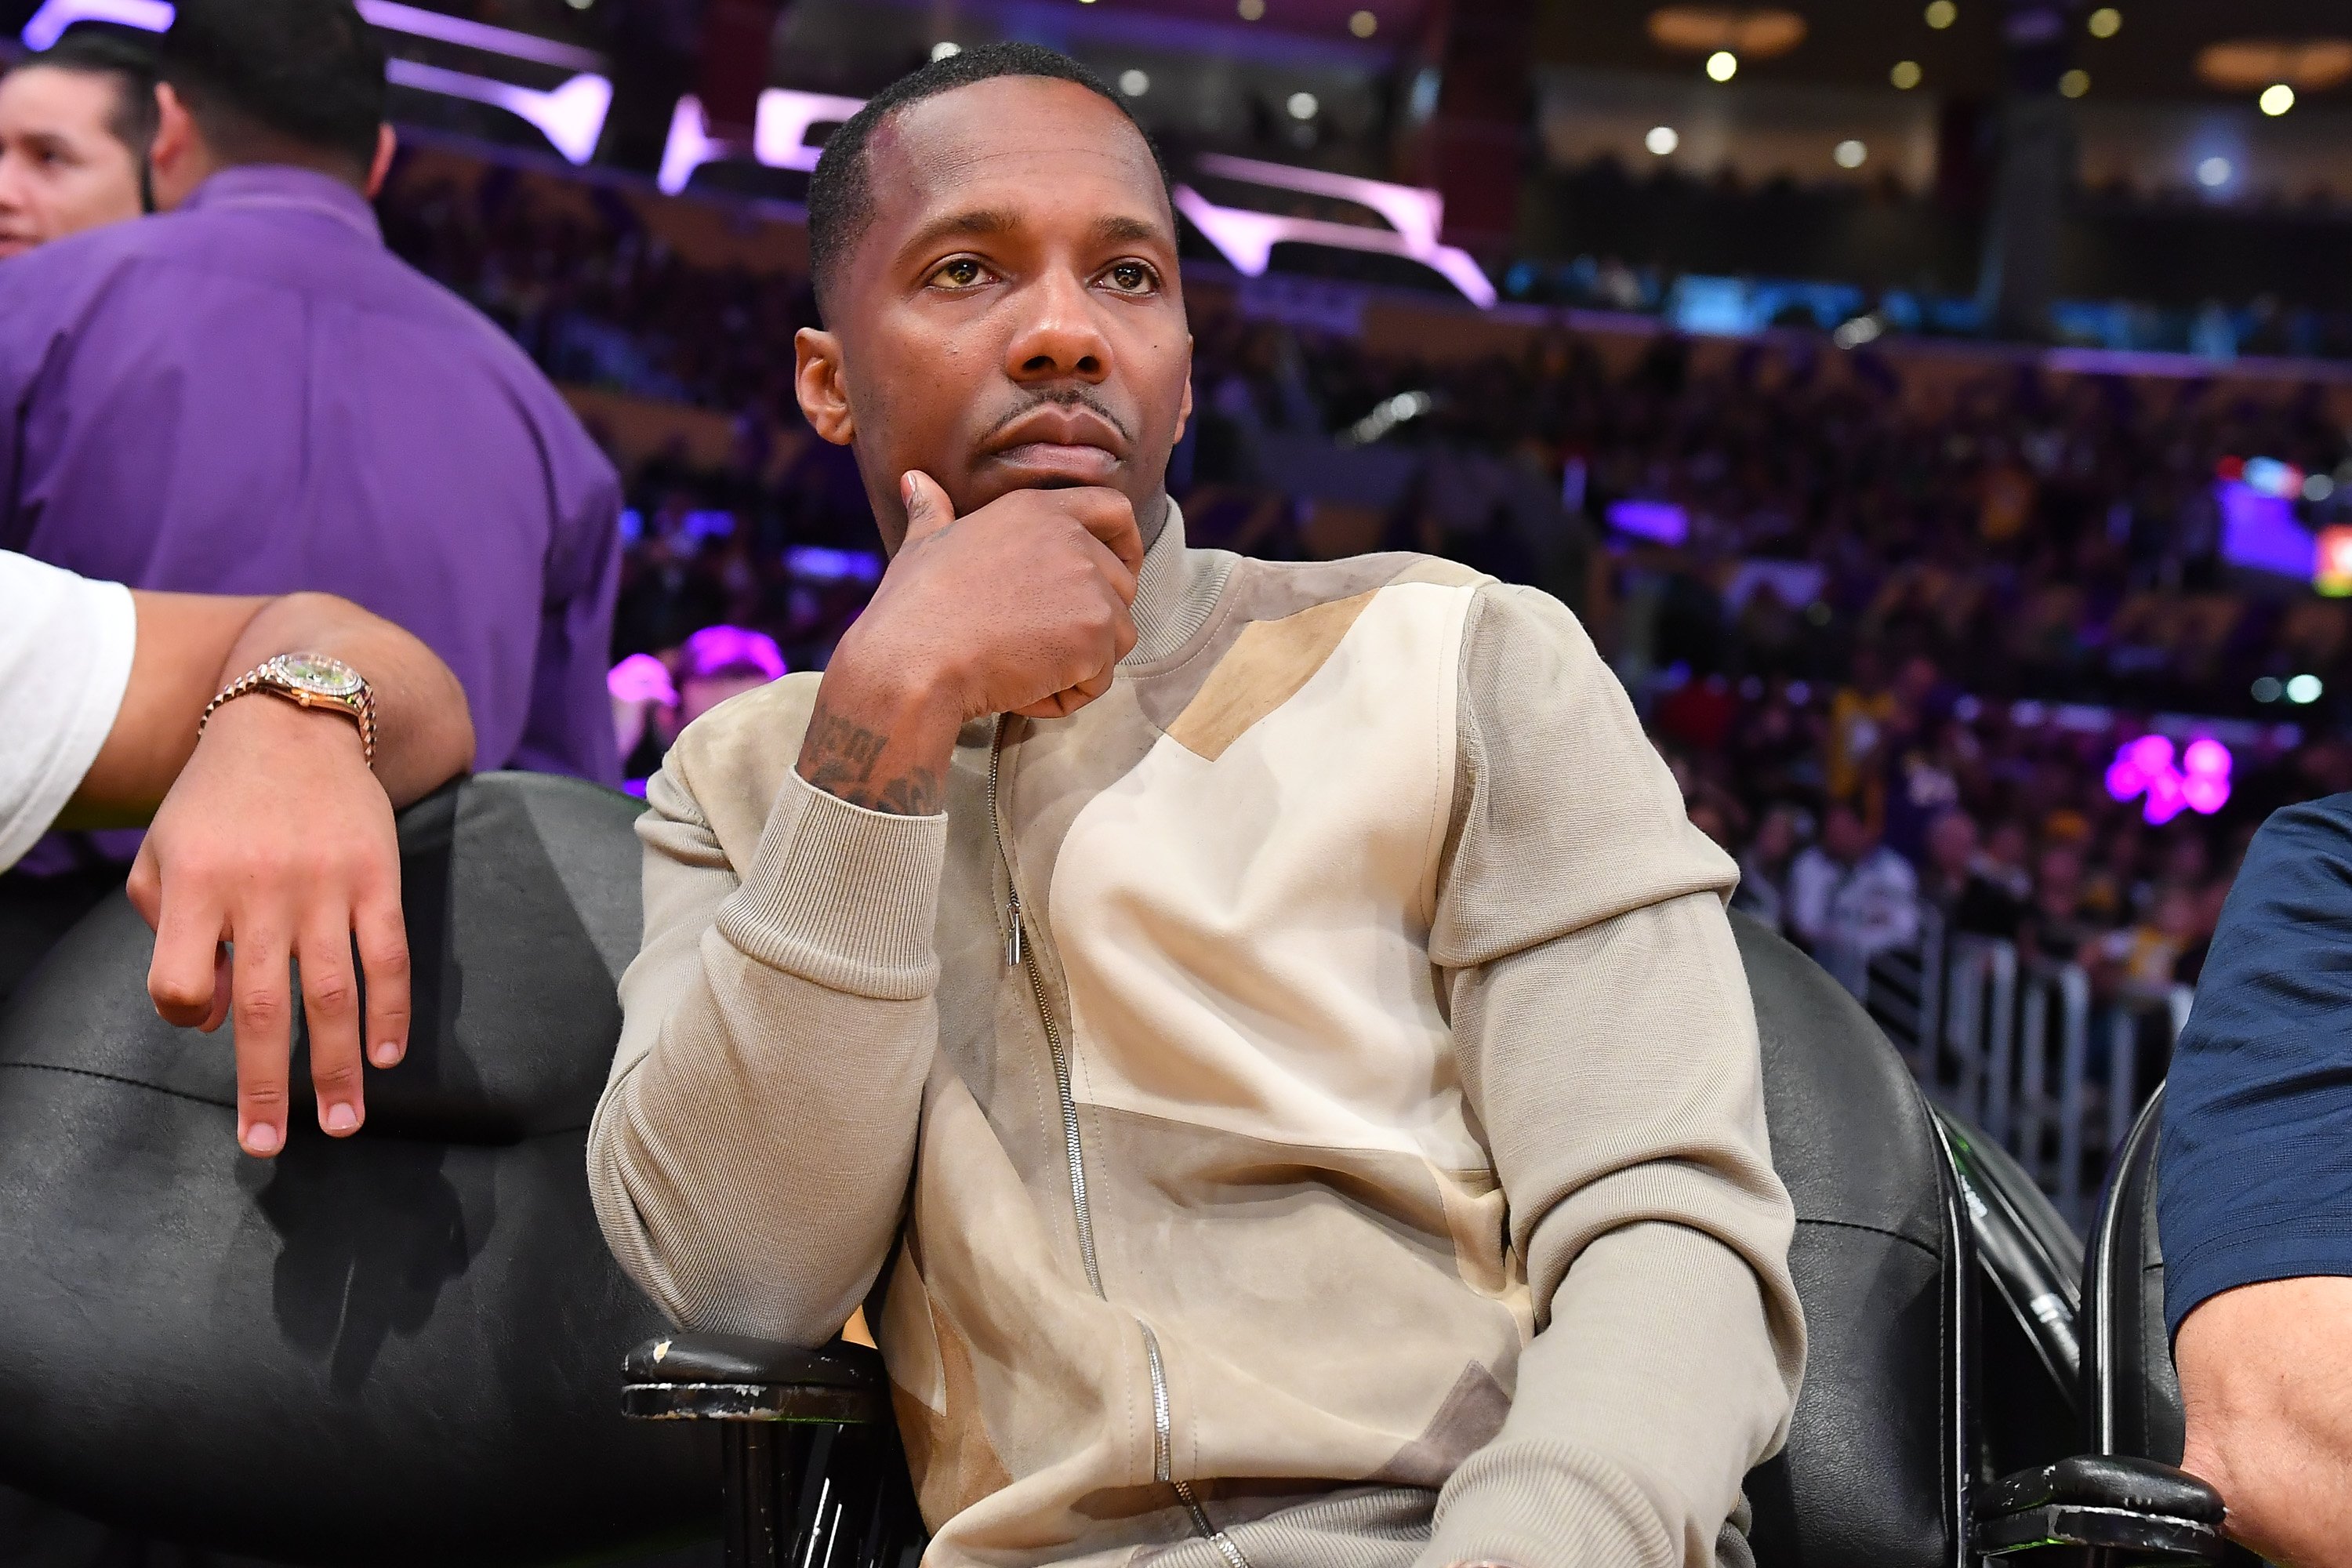 Rich Paul attends a basketball game between the Los Angeles Lakers and the Boston Celtics at Staples Center on February 23, 2020 in Los Angeles, California. | Source: Getty Images